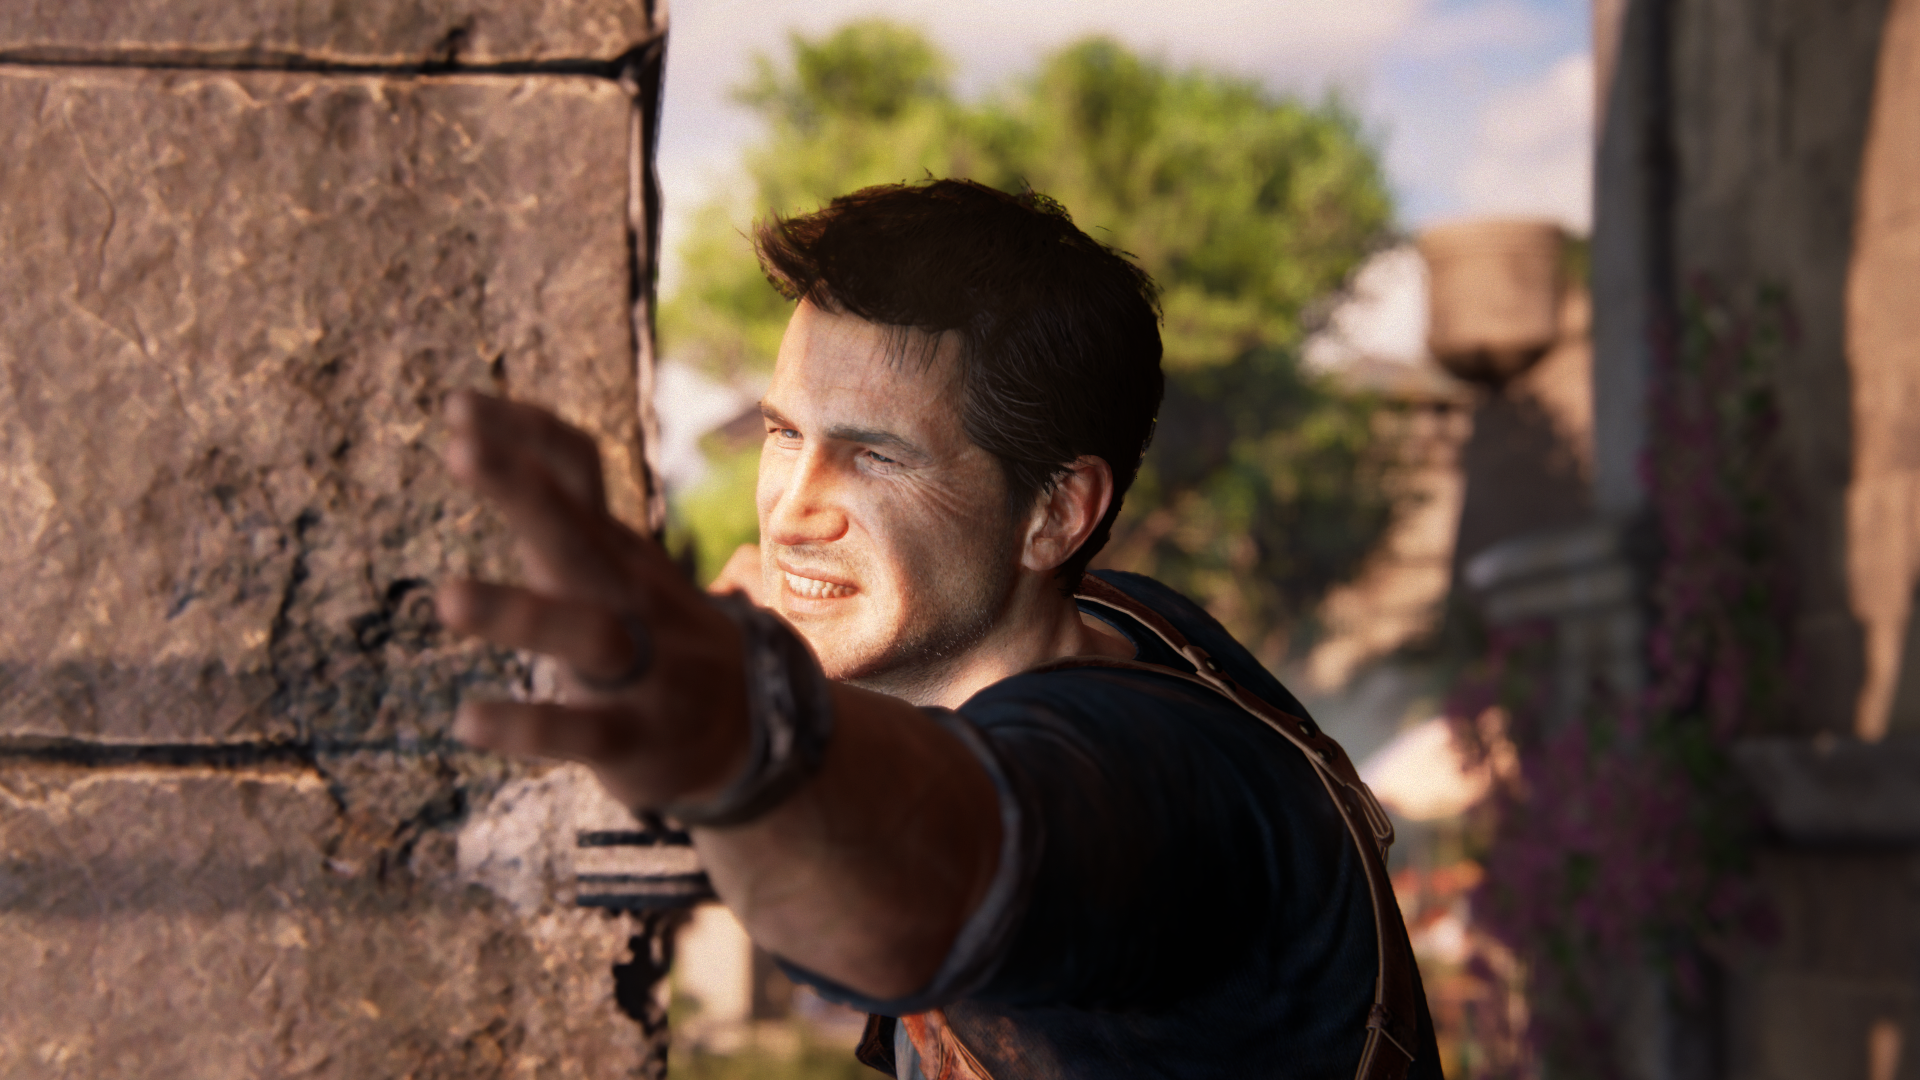 fddUncharted4AThiefsEnd.png